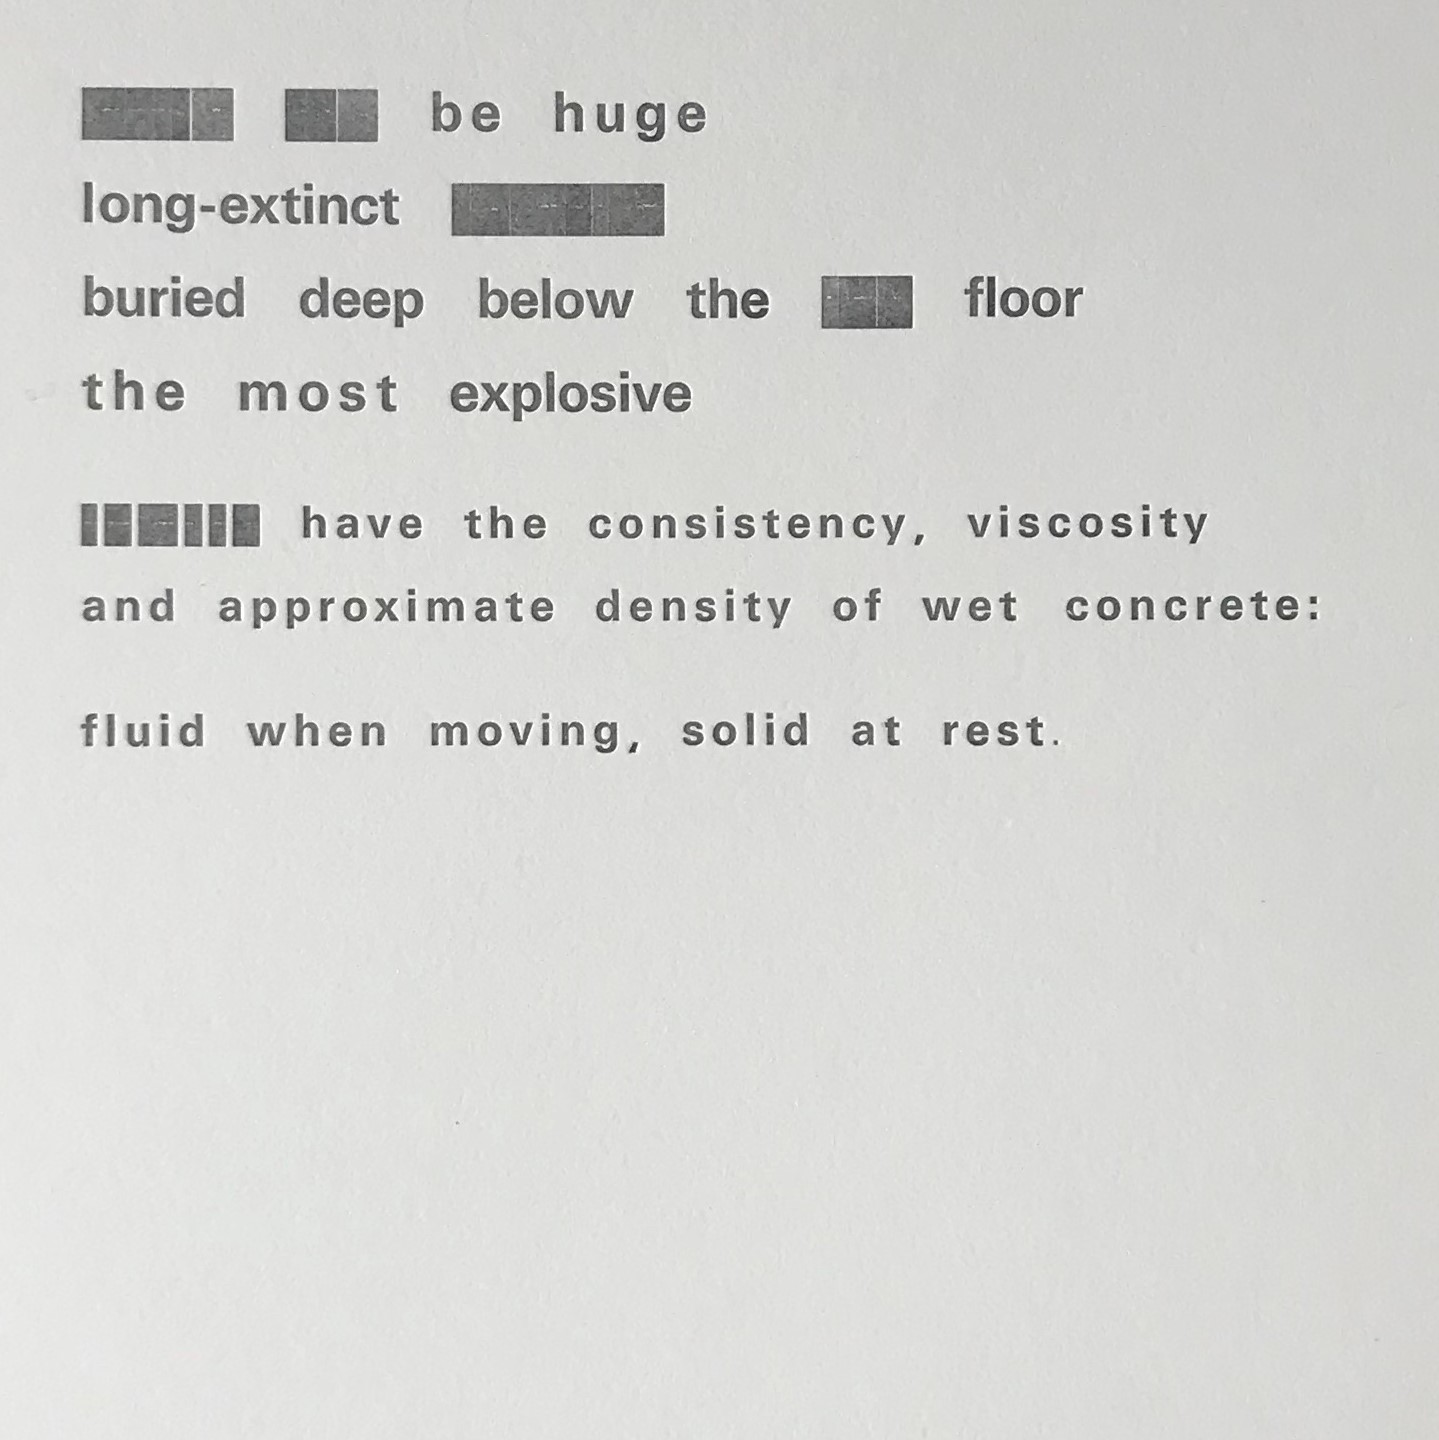 A poem made with old fashioned typeset letters. Ink is a dark grey and is embossed onto a thick ivory paper. Some words have been redacted by using the flat end of the intended letter block. The poem reads: [redacted text] be huge Long-extinct  [redacted text] Buried deep below the [redacted text] floor The most explosive [redacted text] have the consistency, viscosity And approximate density of wet concrete: Fluid when moving, solid at rest.